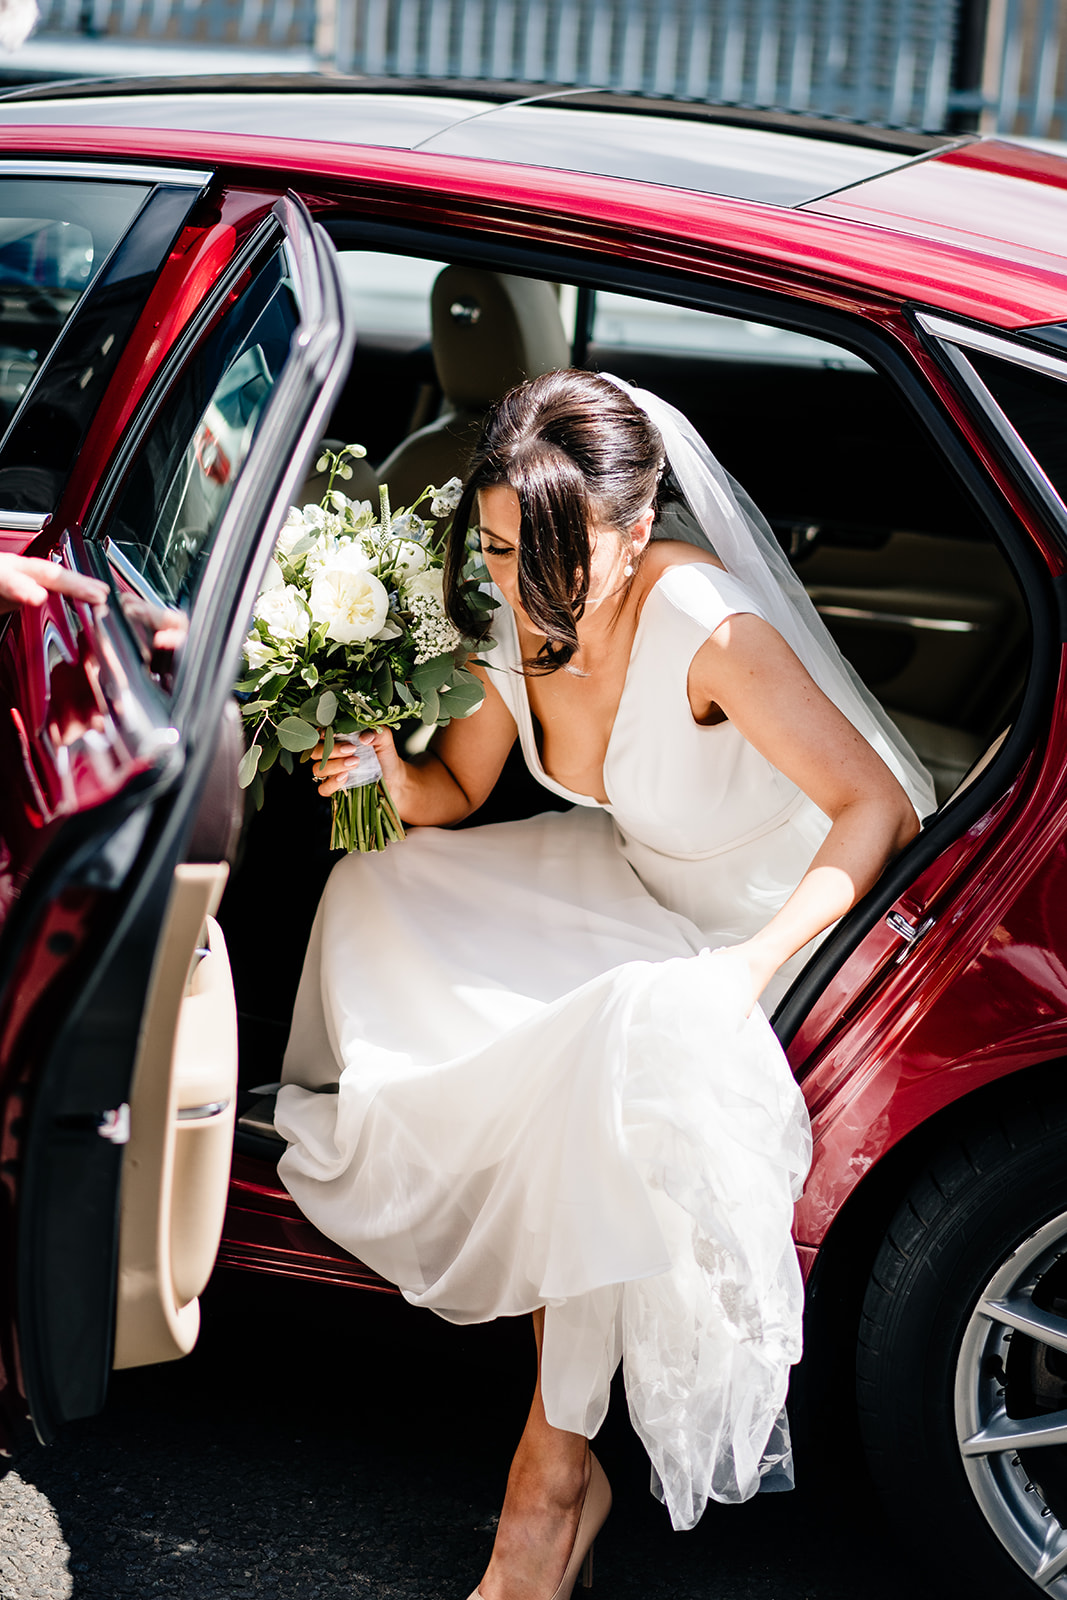 bride getting out the wedding car for the big day